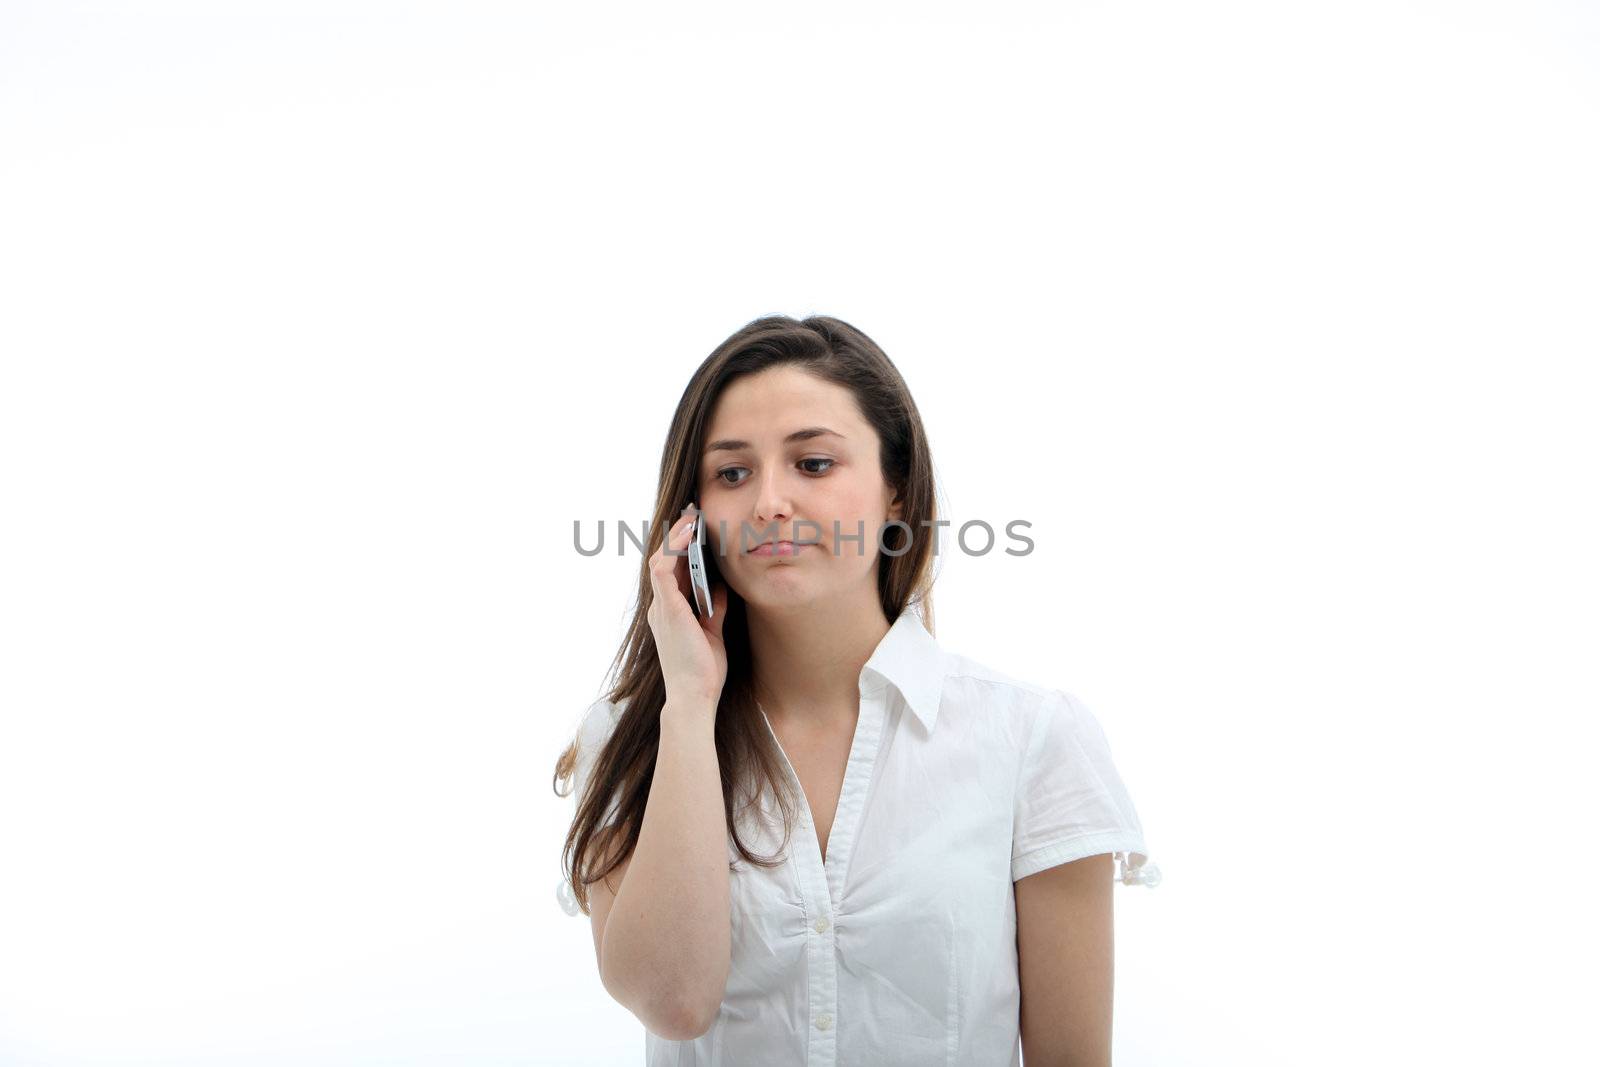 Casual woman with a serious expression listening intently to her mobile phone